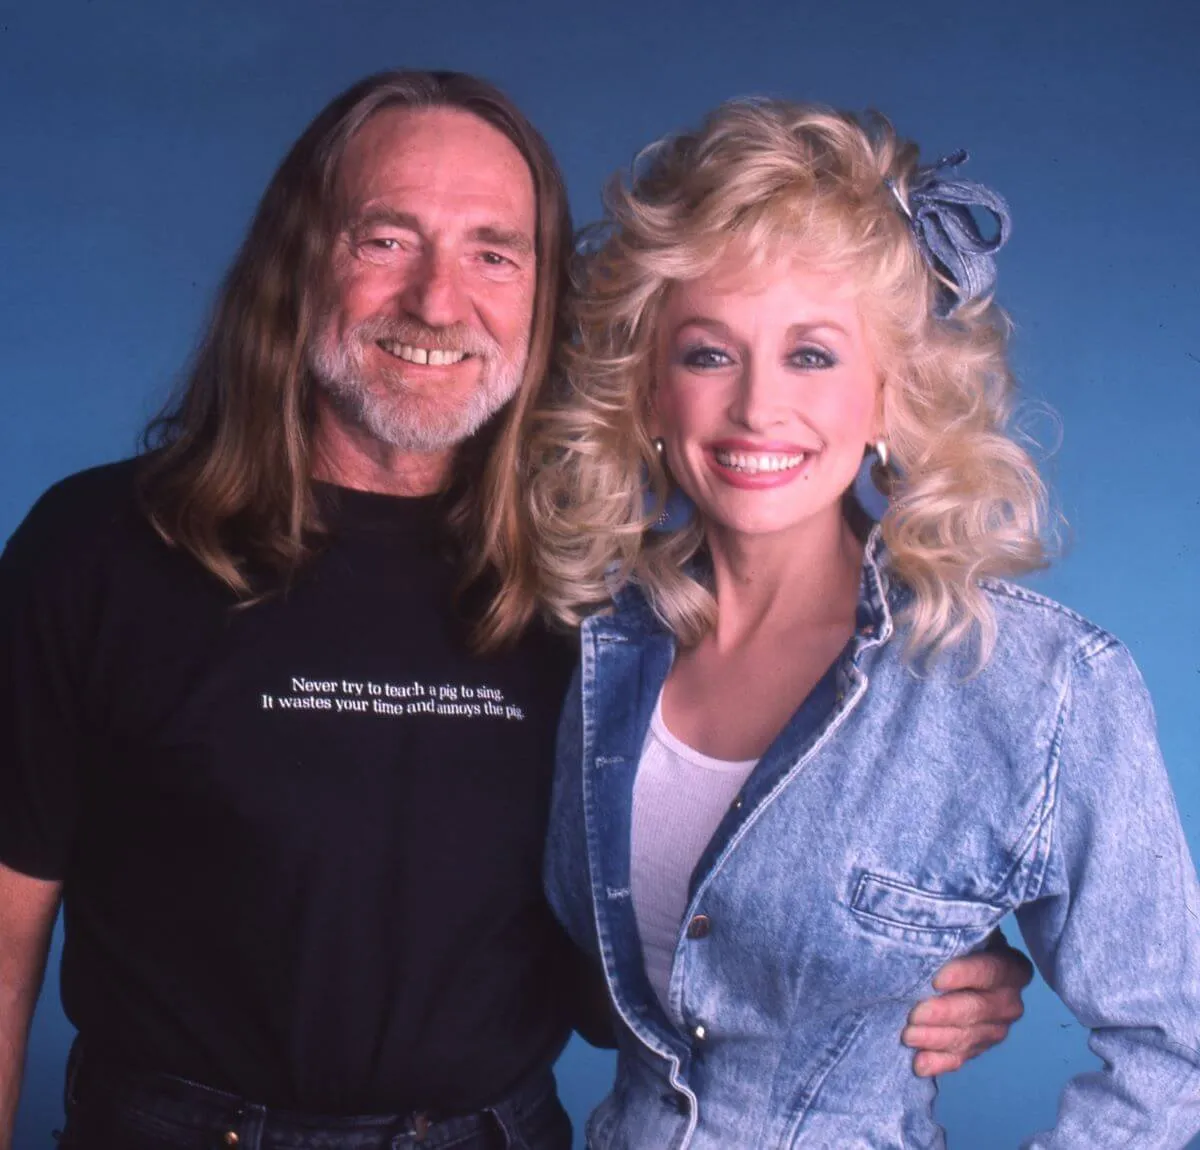 Willie Nelson wears a black shirt and stands with his arm around Dolly Parton's waist. She wears a denim jacket and denim hair bow.